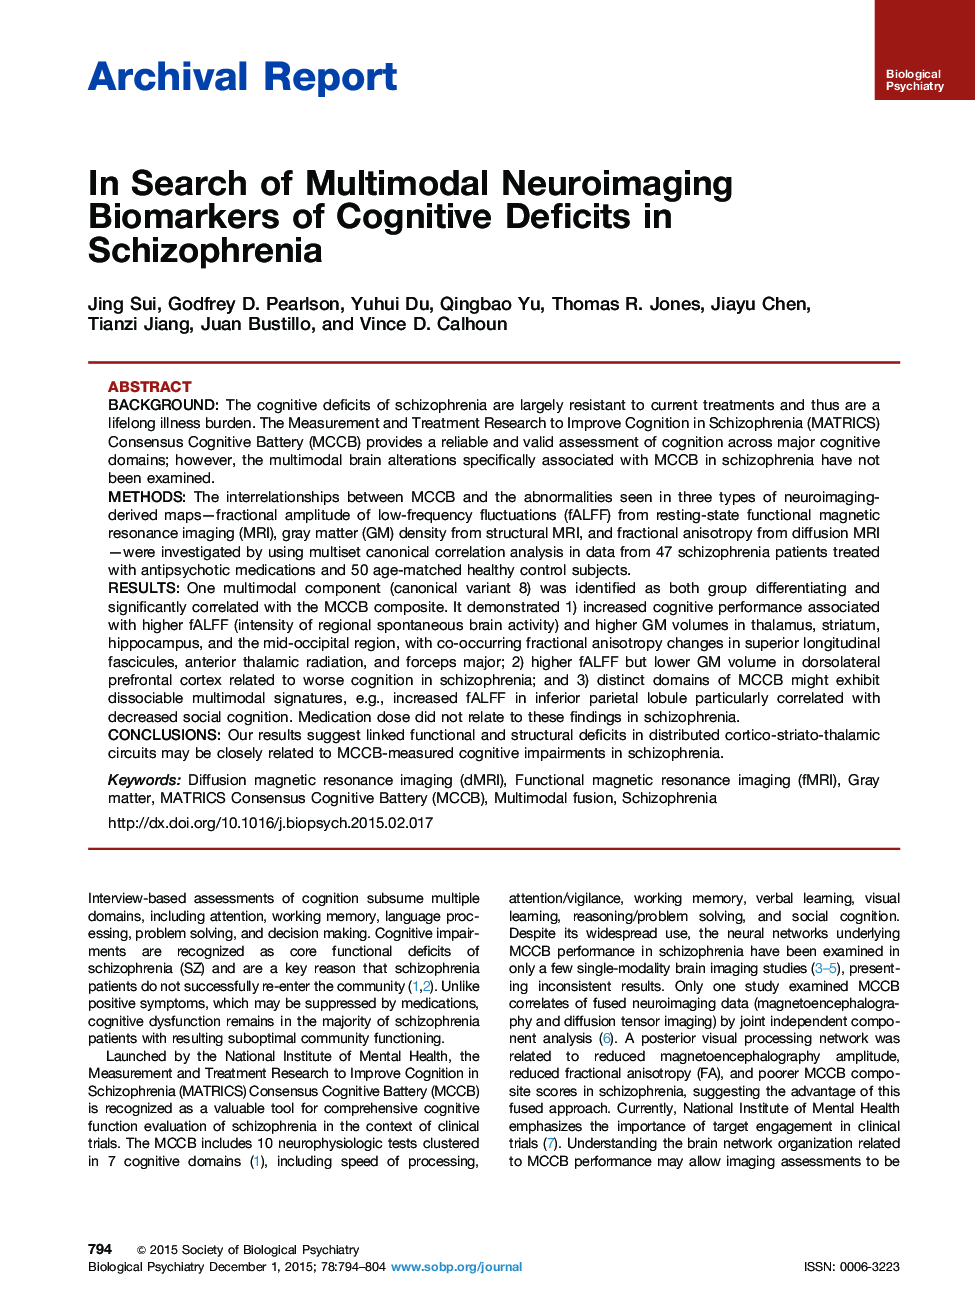 In Search of Multimodal Neuroimaging Biomarkers of Cognitive Deficits in Schizophrenia